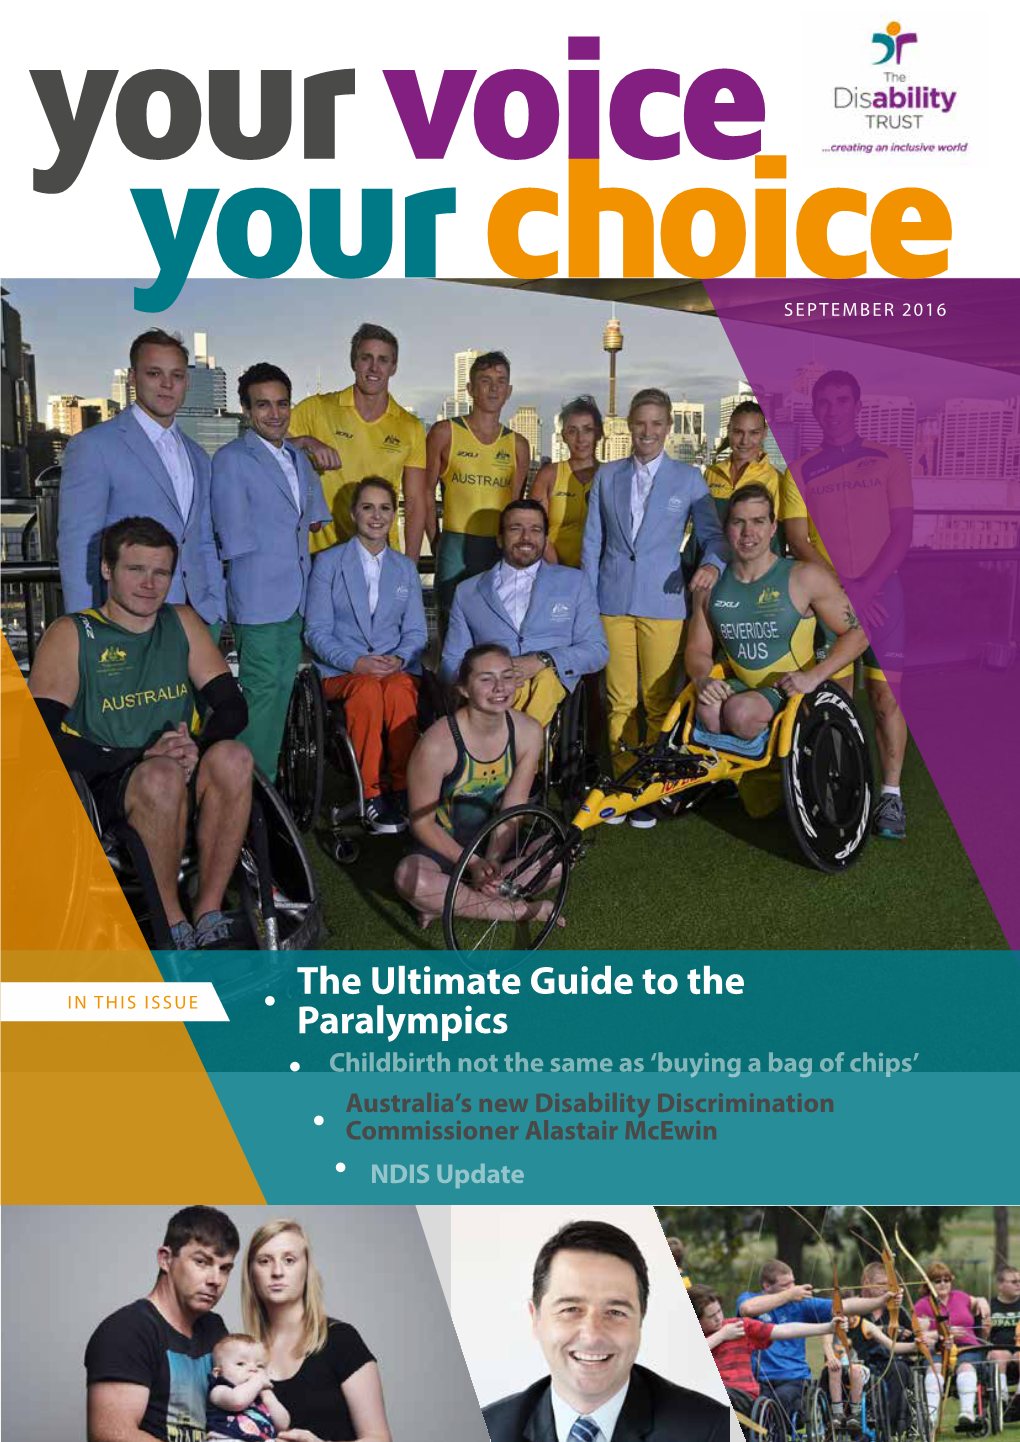 The Ultimate Guide to the Paralympics